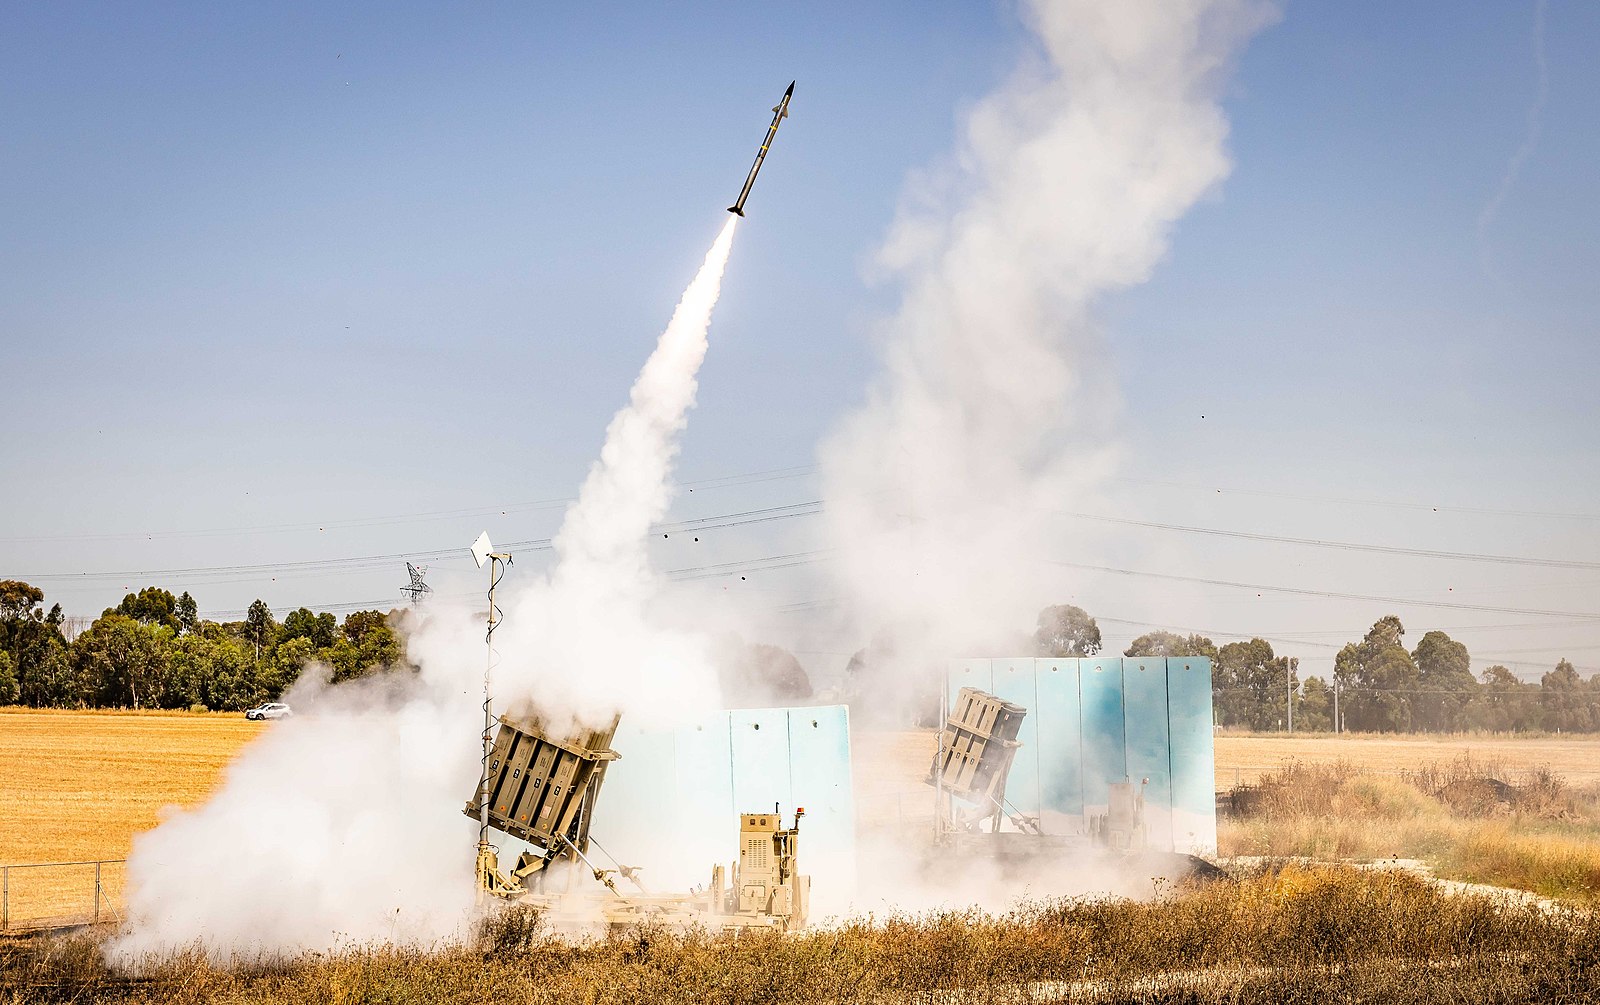 Israeli defense system, Iron Dome, launching a missile to intercept an enemy rocket headed toward civilian areas.